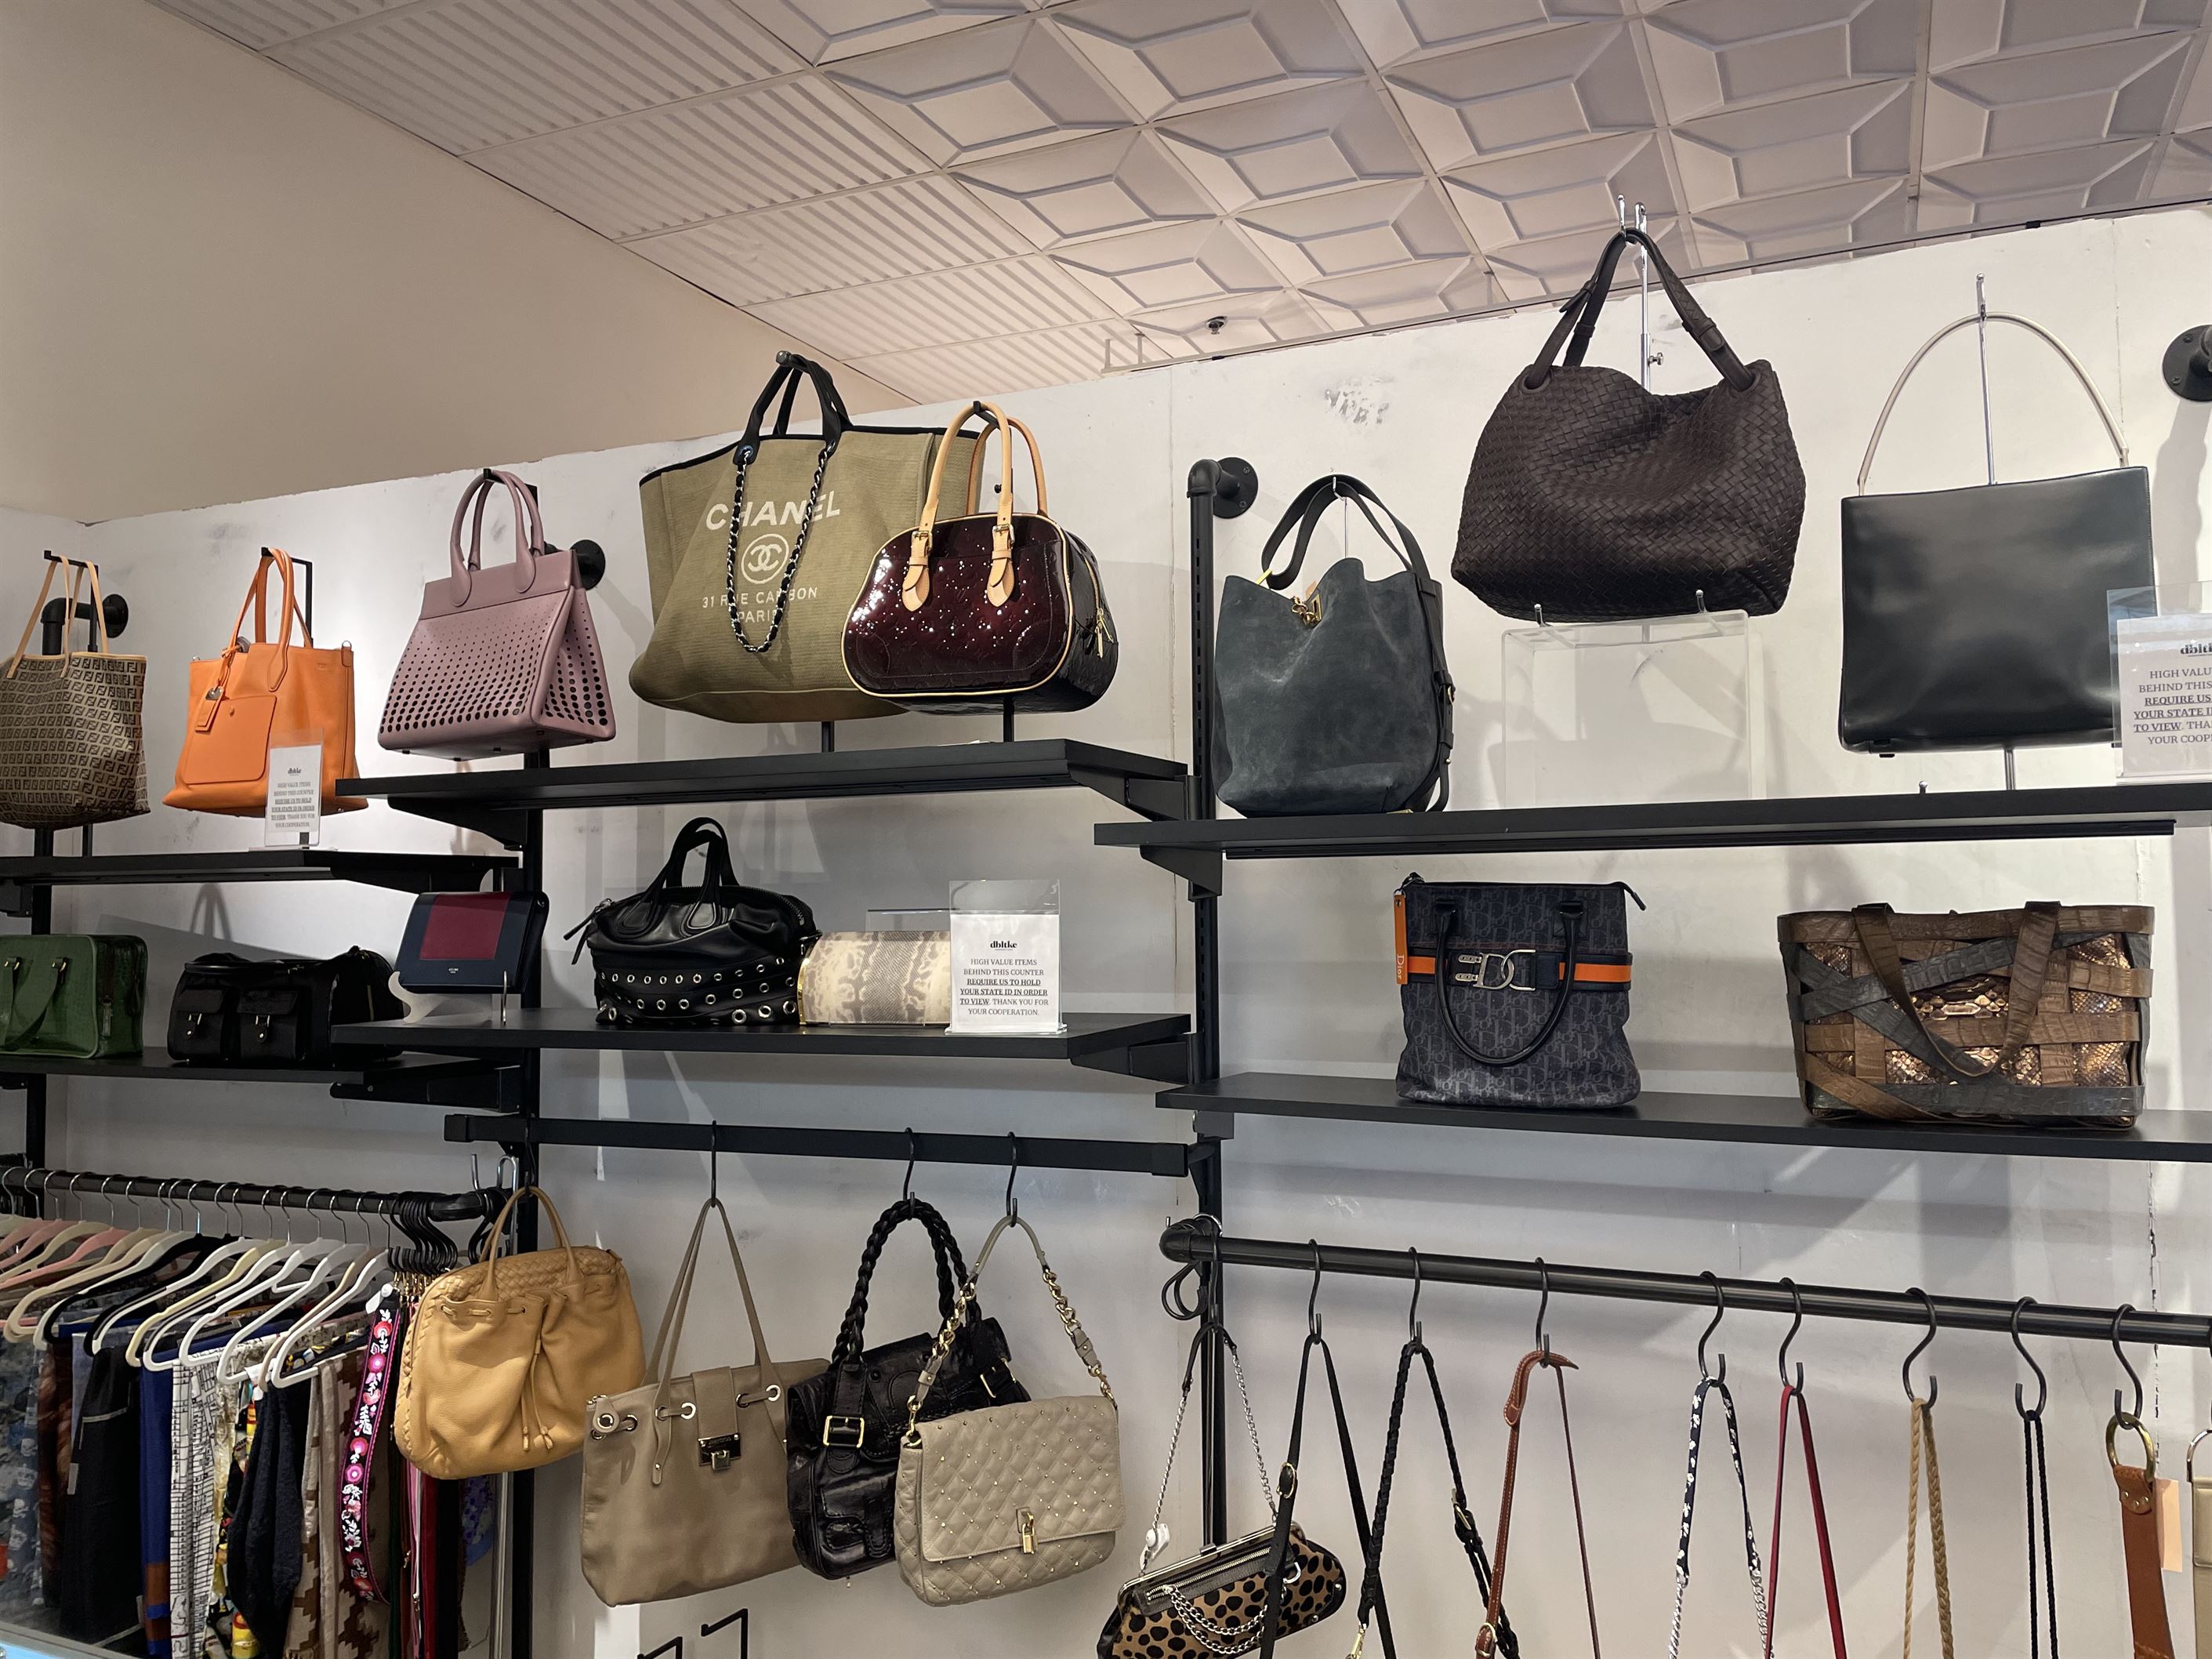 Double Take Luxury Consignment Boutique sells a wide variety of designer purses. Photo courtesy of Amanda Alicea